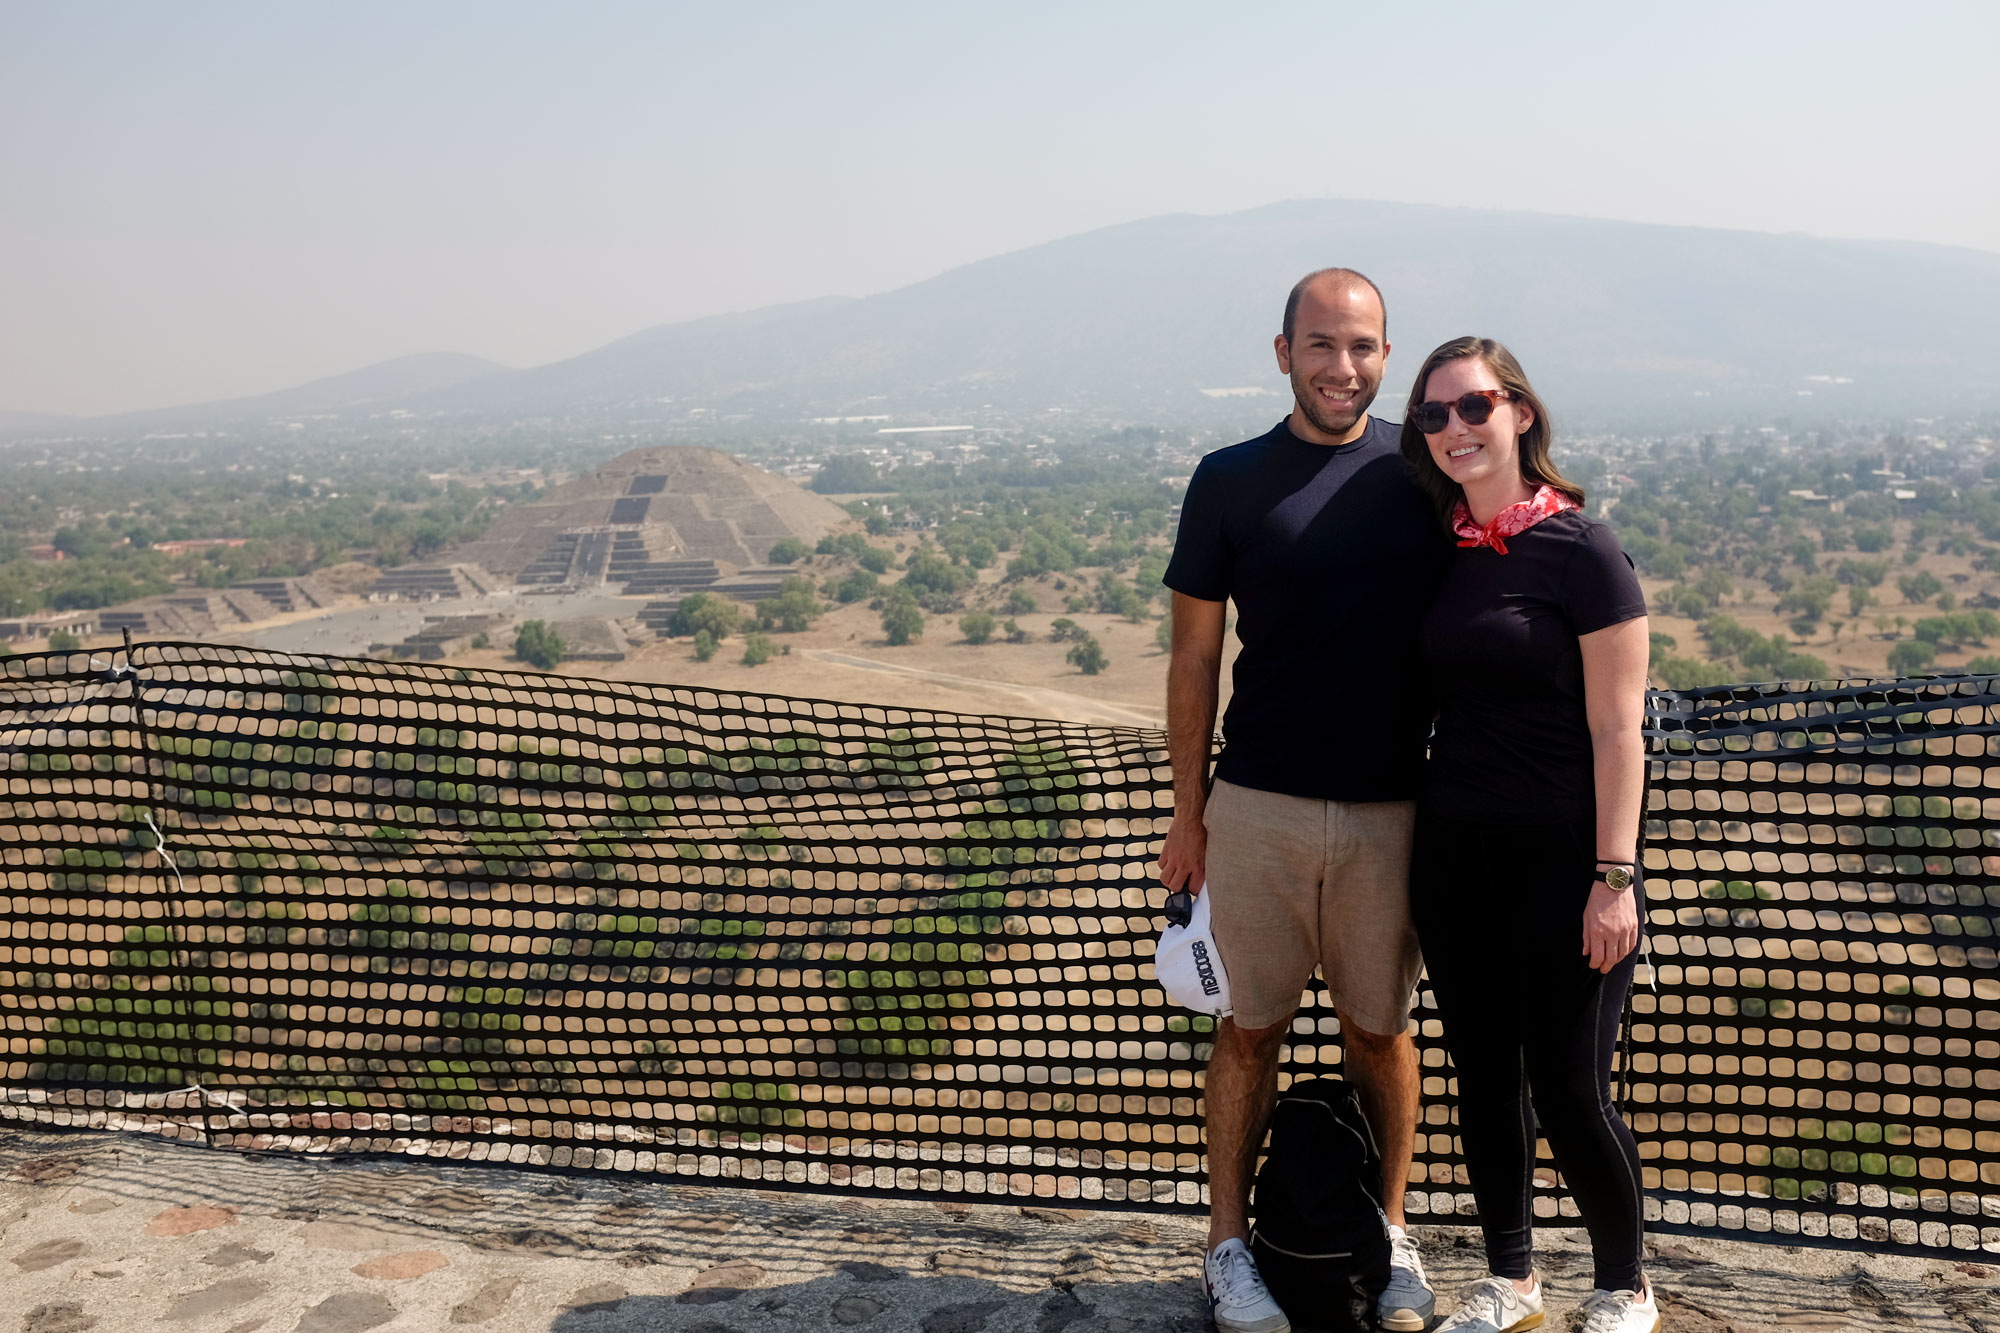 Alyssa and Michael on the Pyramid of the Sun